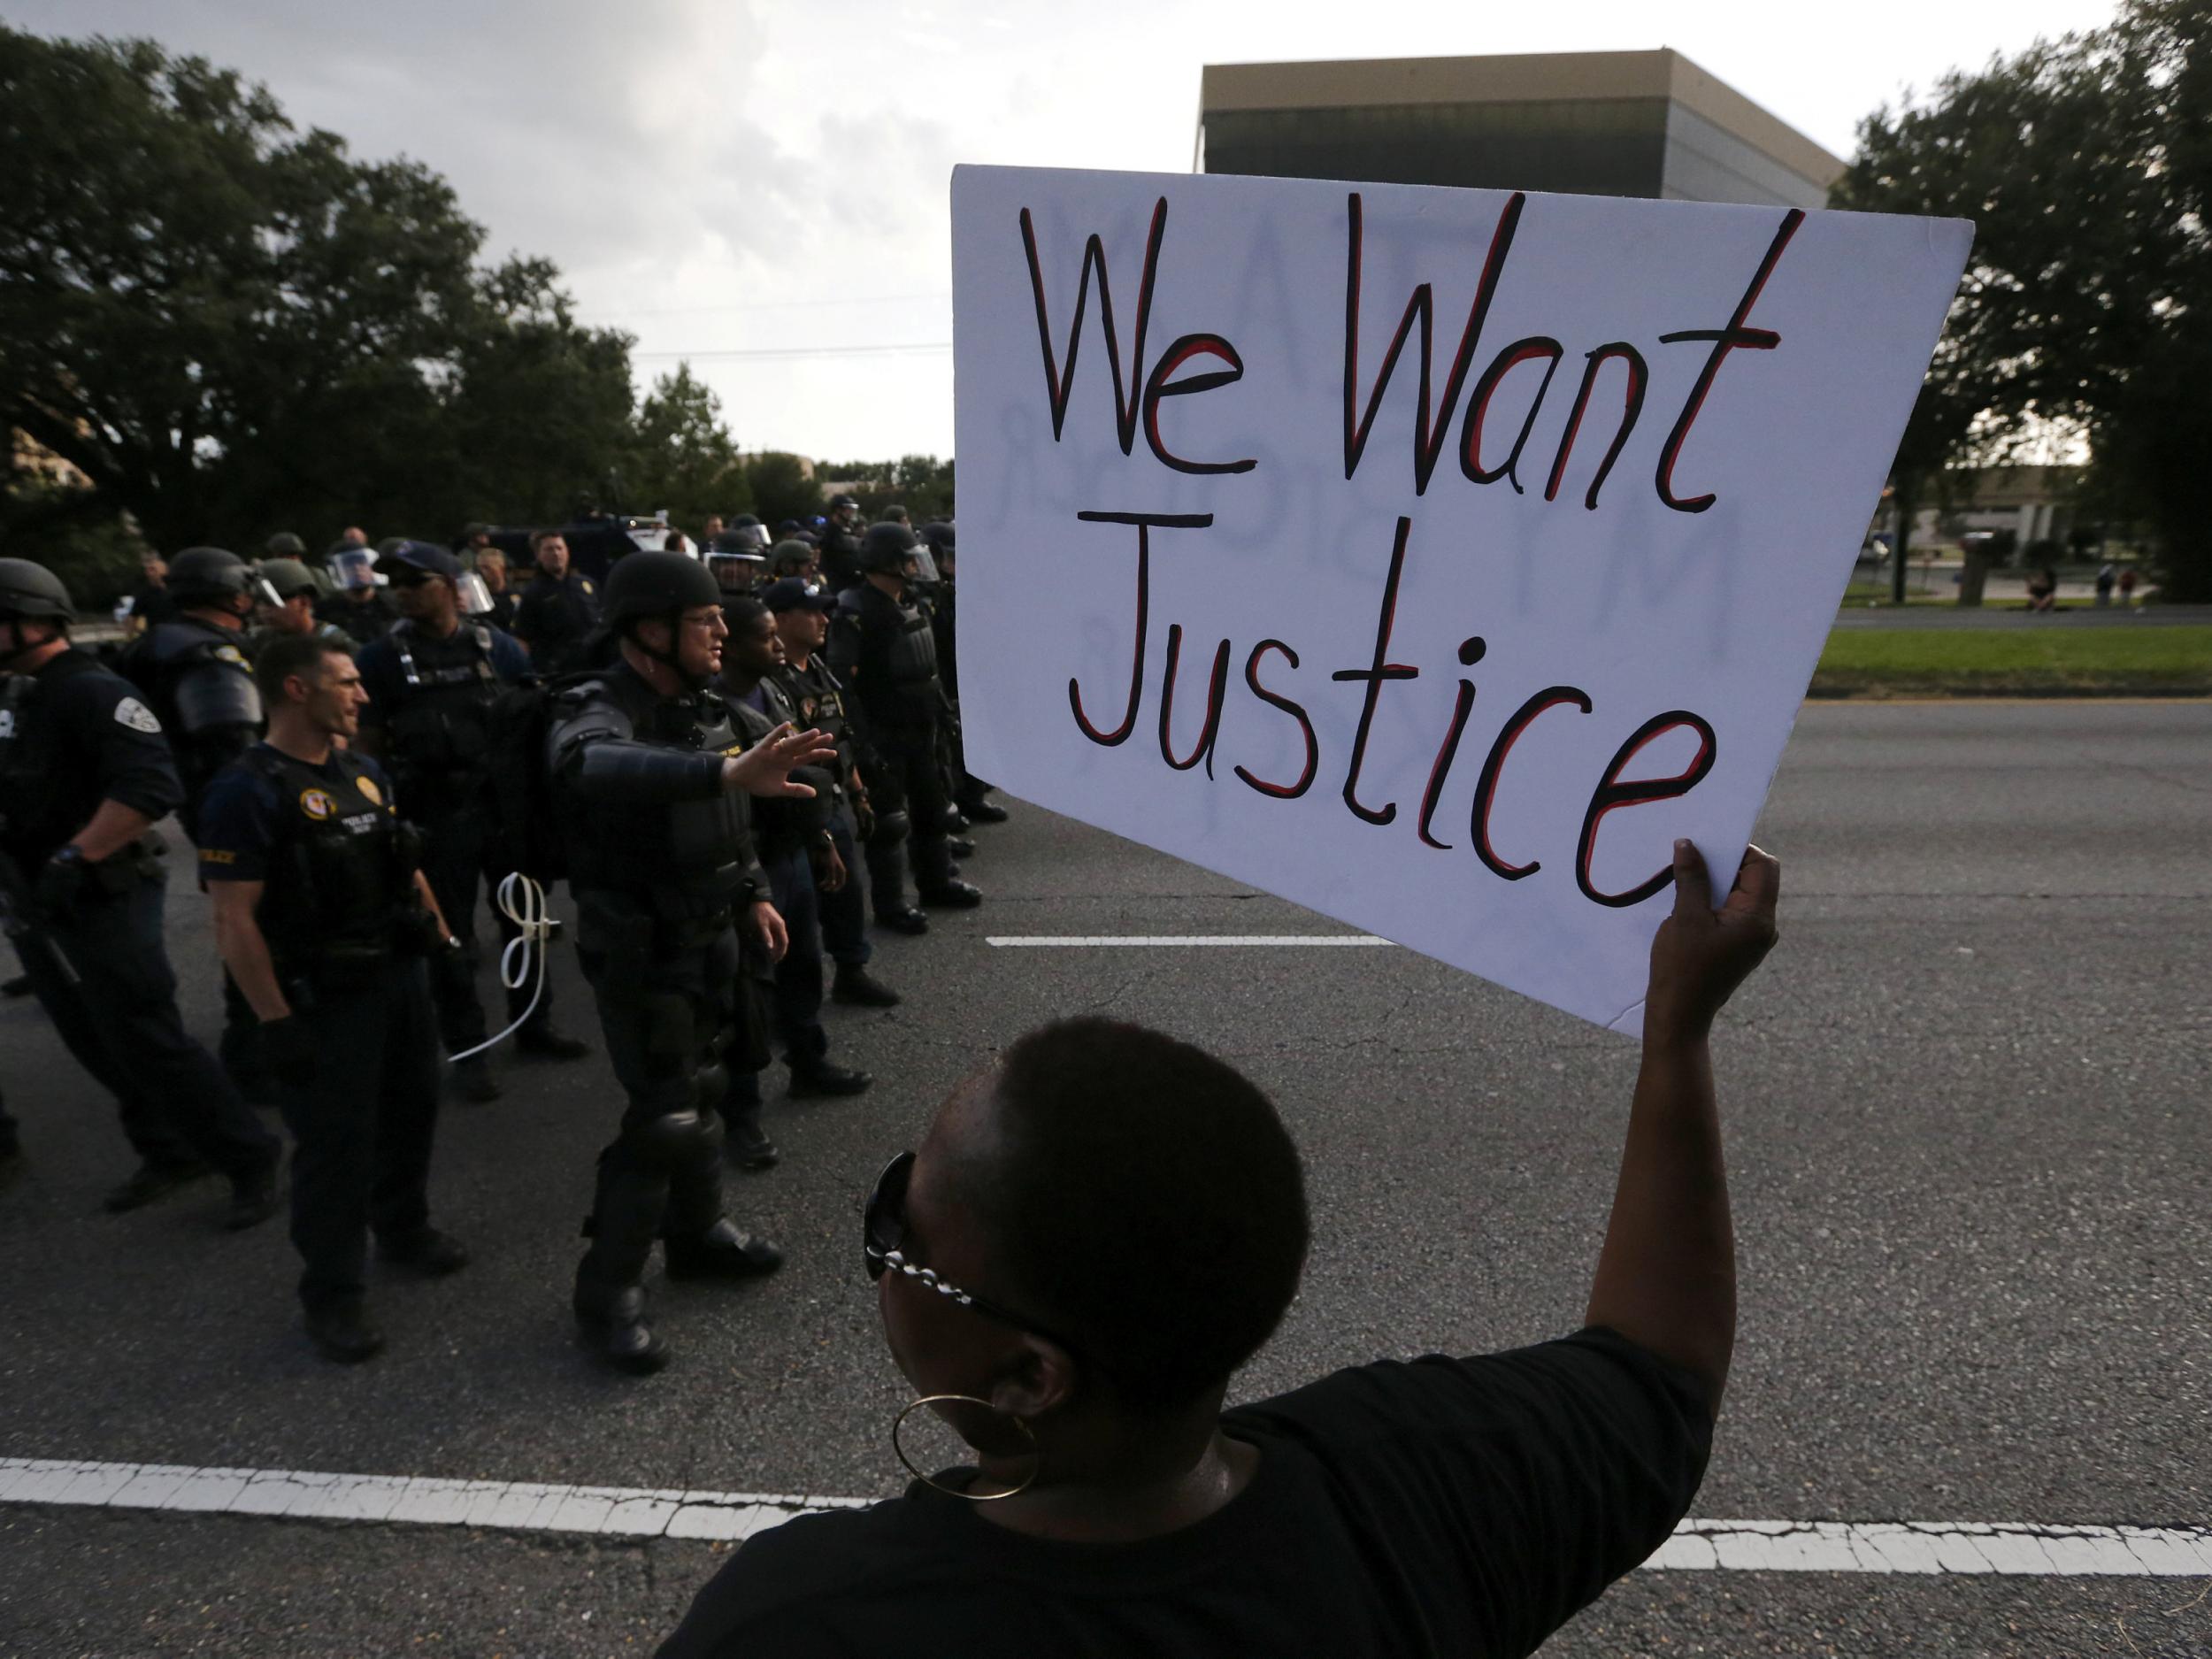 Demonstrators protest the shooting death of Alton Sterling near the headquarters of the Baton Rouge Police Department (Jonathon Bachman/ Reuters )